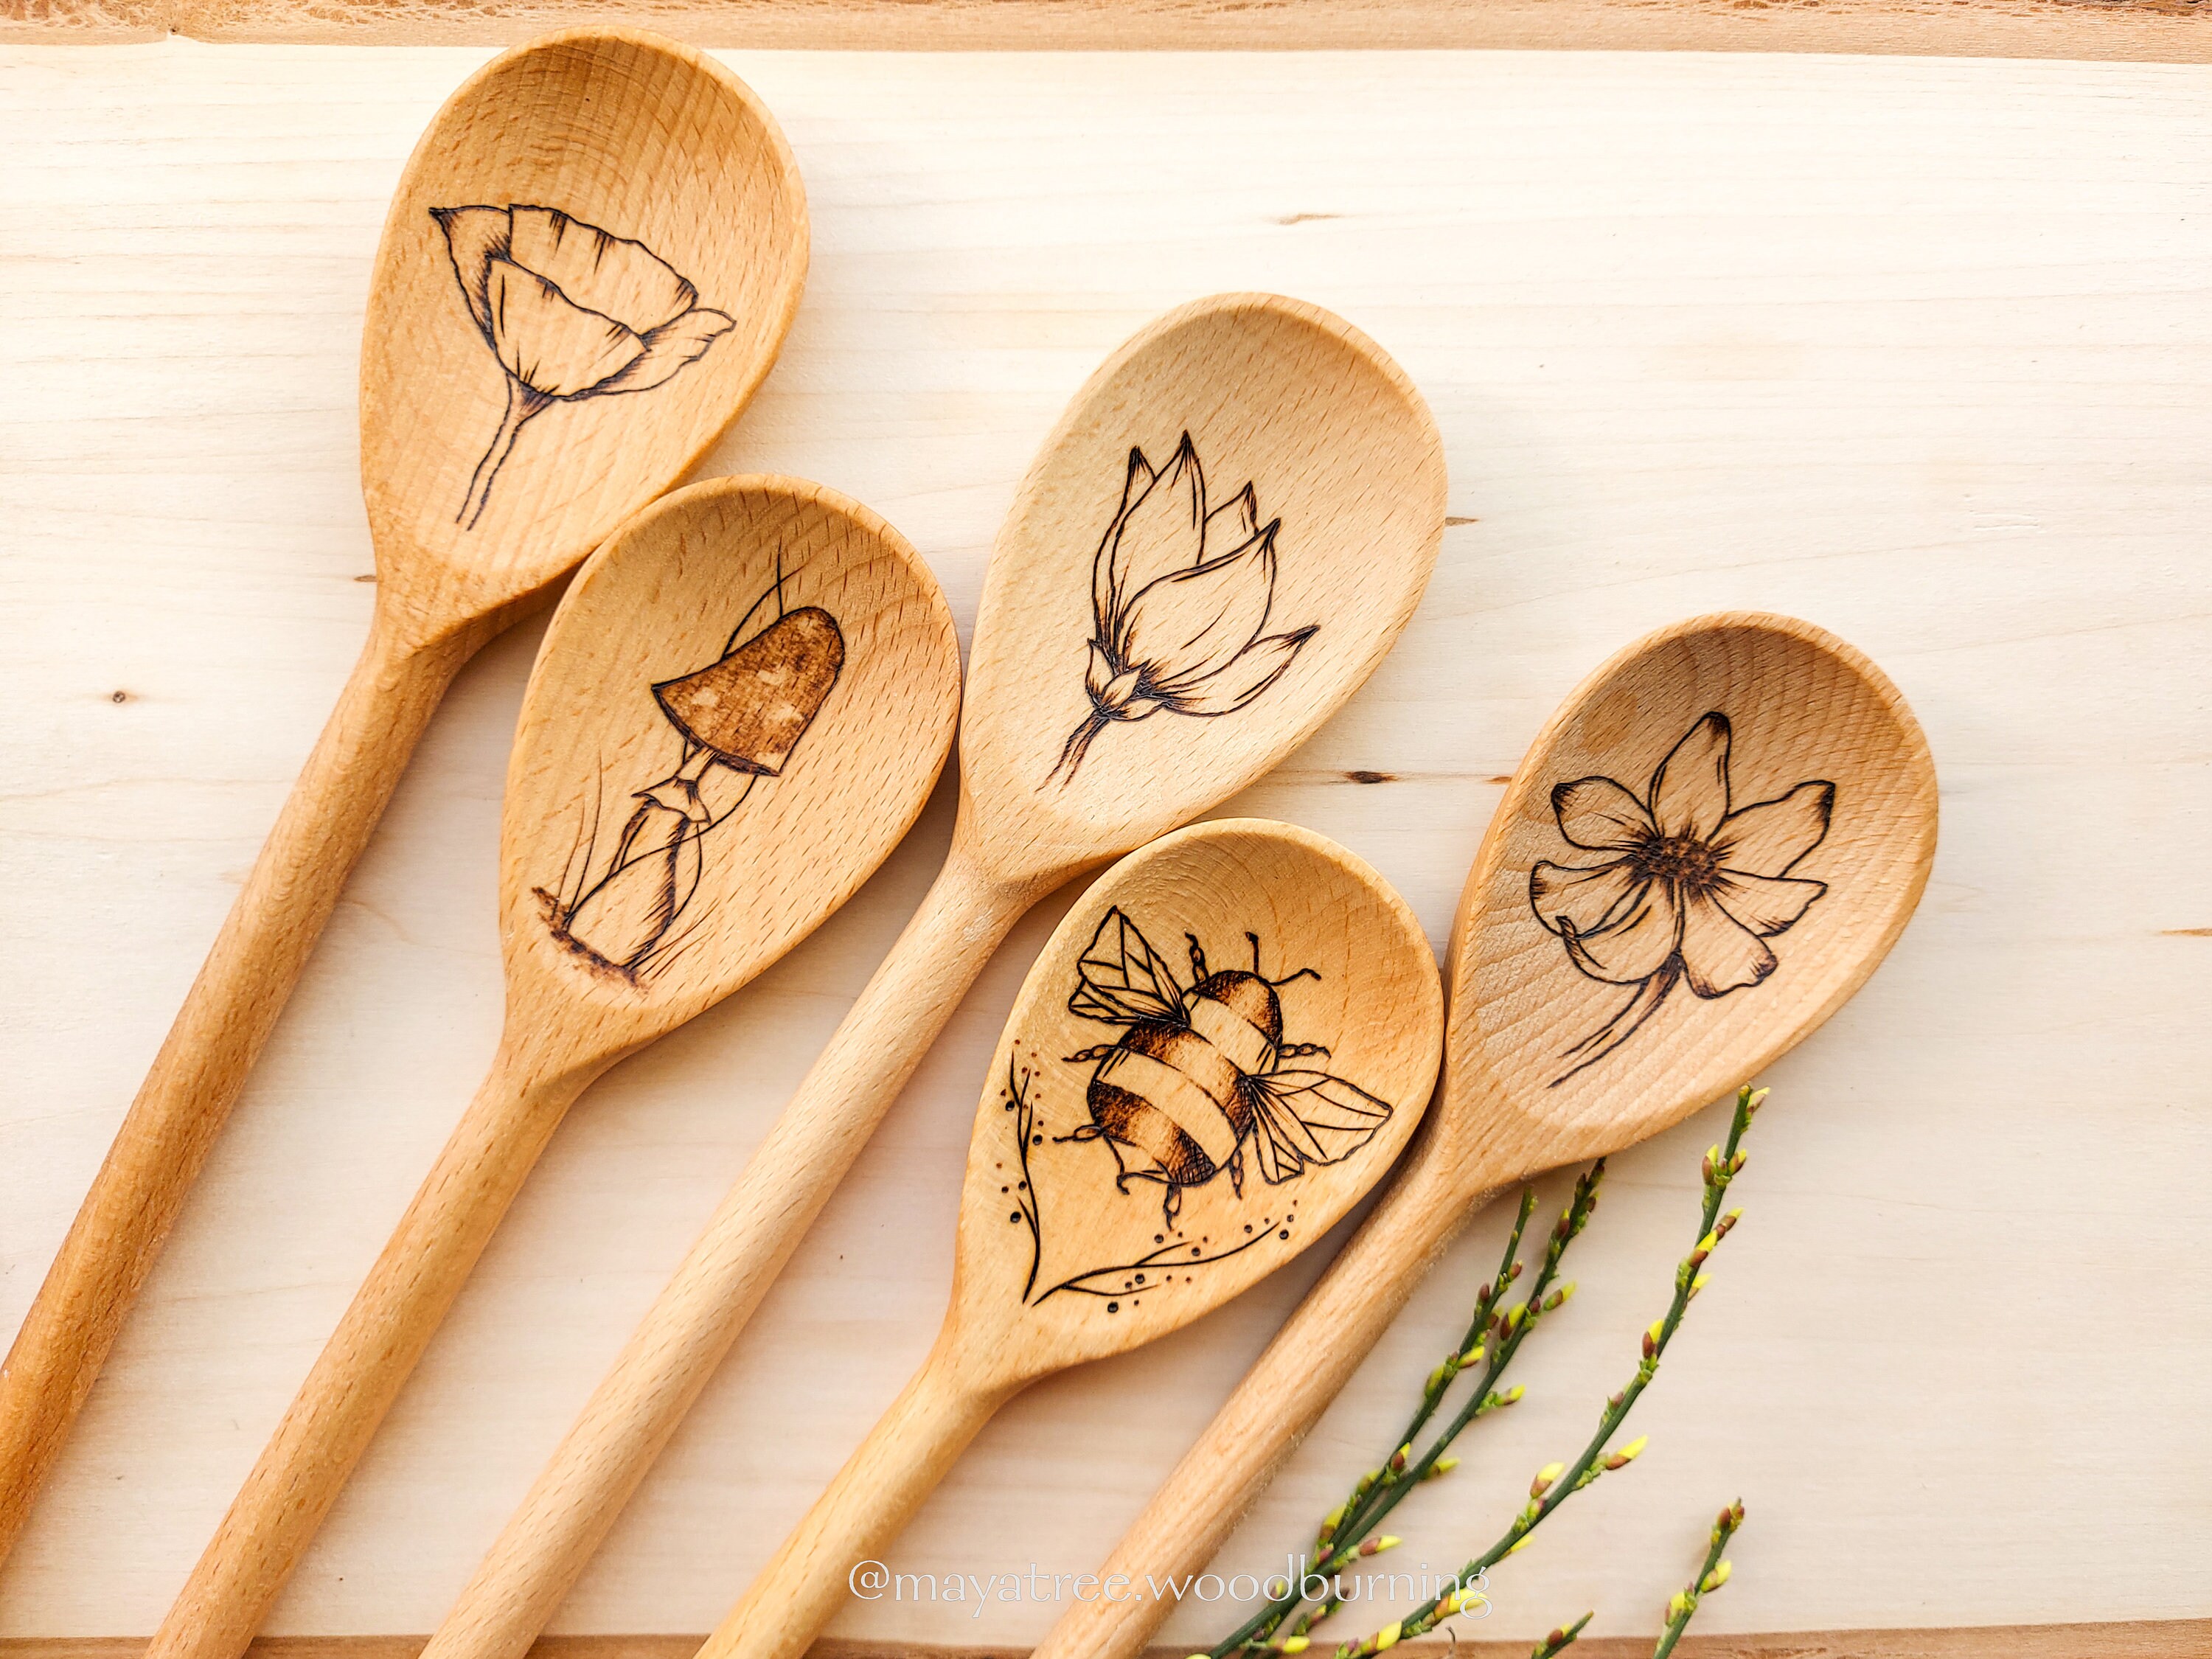 59 Pc. Woodburning Kit 6 Wooden Spoons for Cooking Pyrography